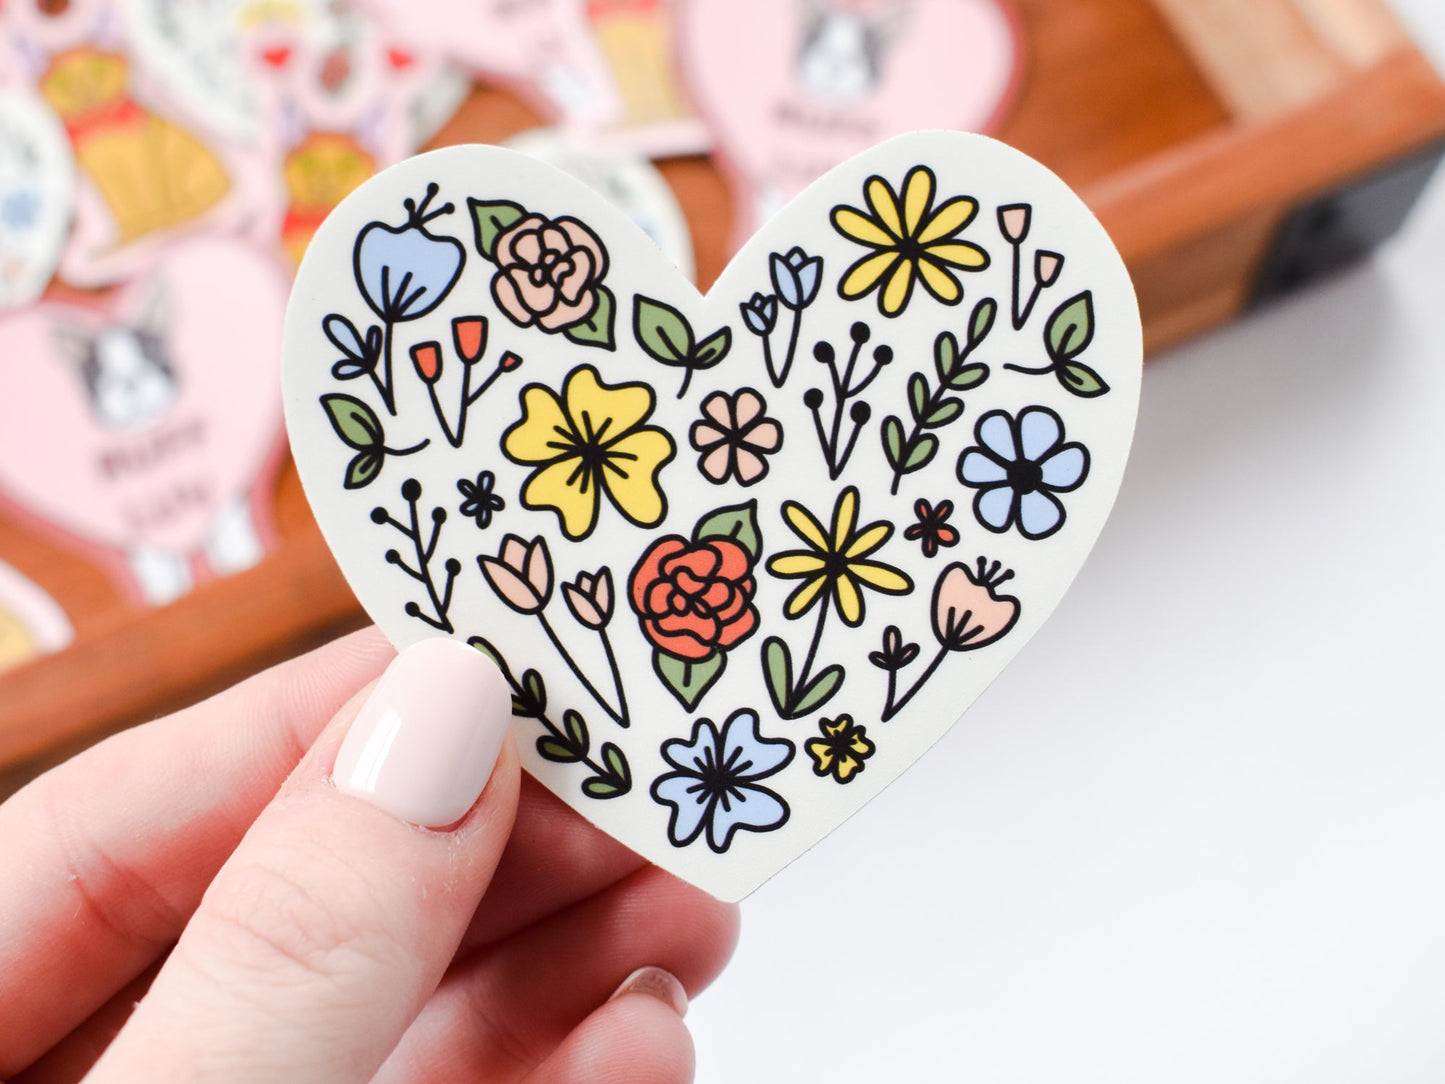 Load image into Gallery viewer, Floral Heart Sticker
